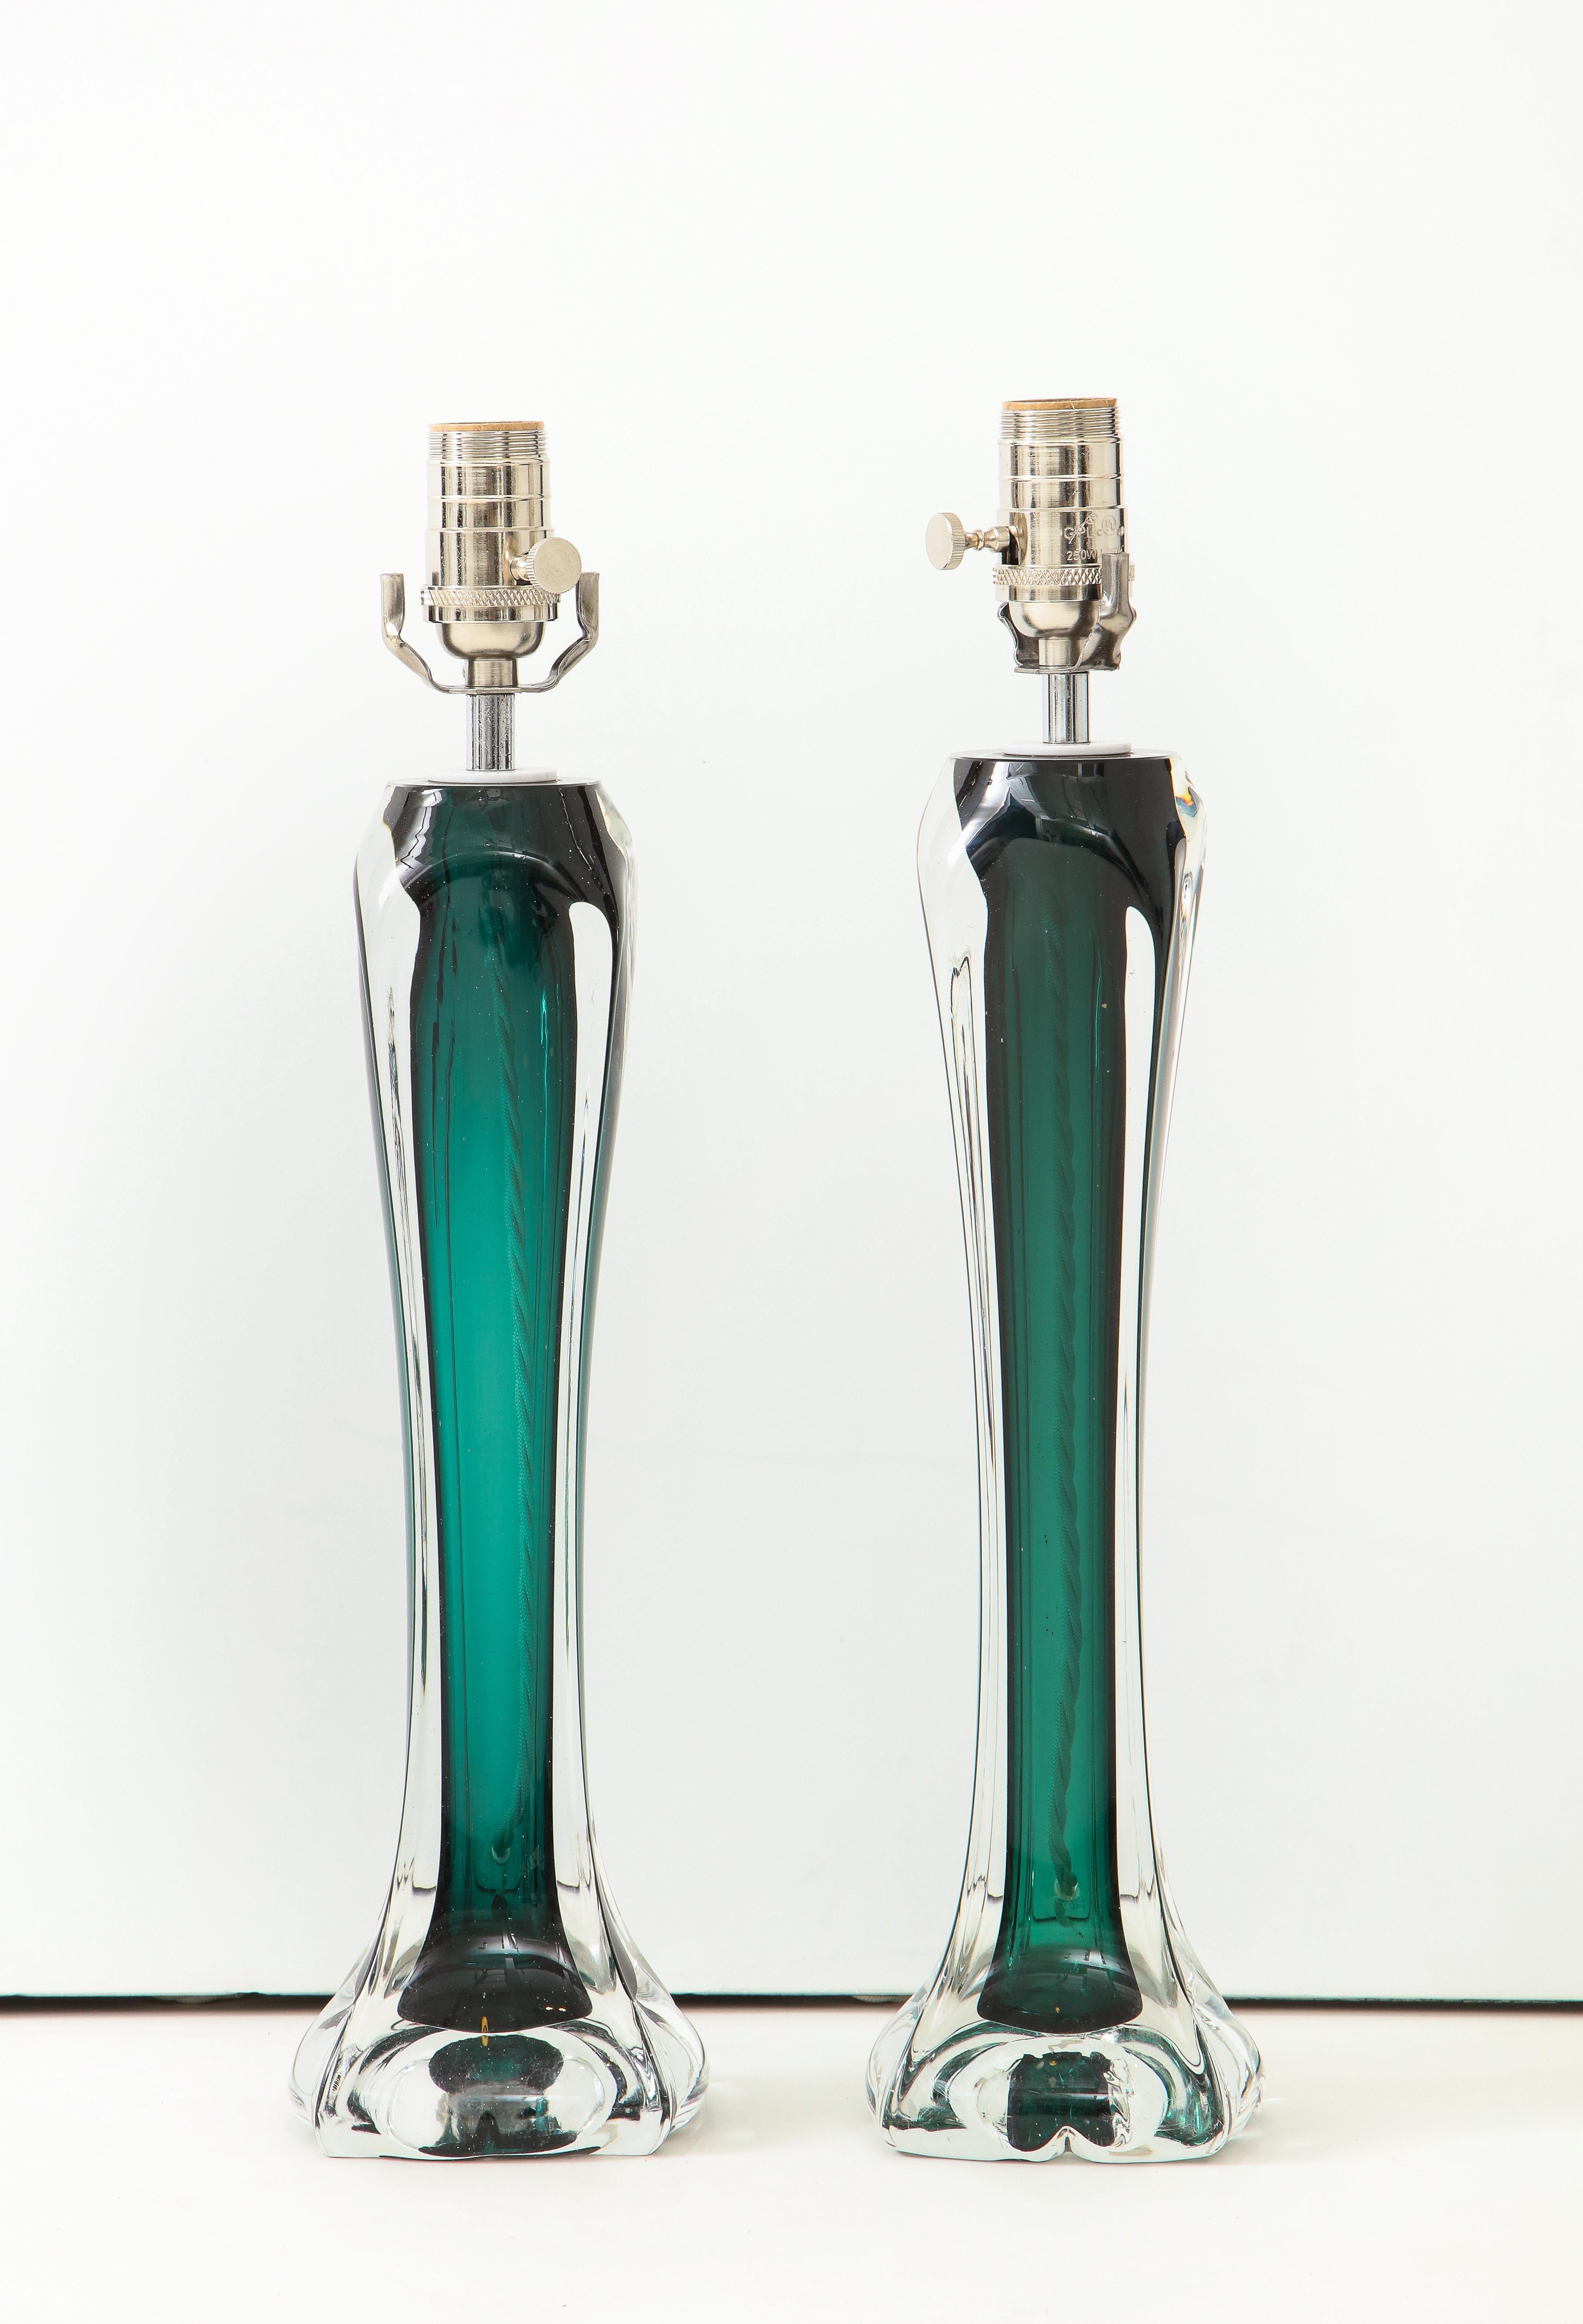 A pair of Flygsfors crystal lamps in a stunning emerald green. Sculptural in form, the narrow silhouette of the lamps tapers to a floral-like base. More than just lamps, these are works of art!